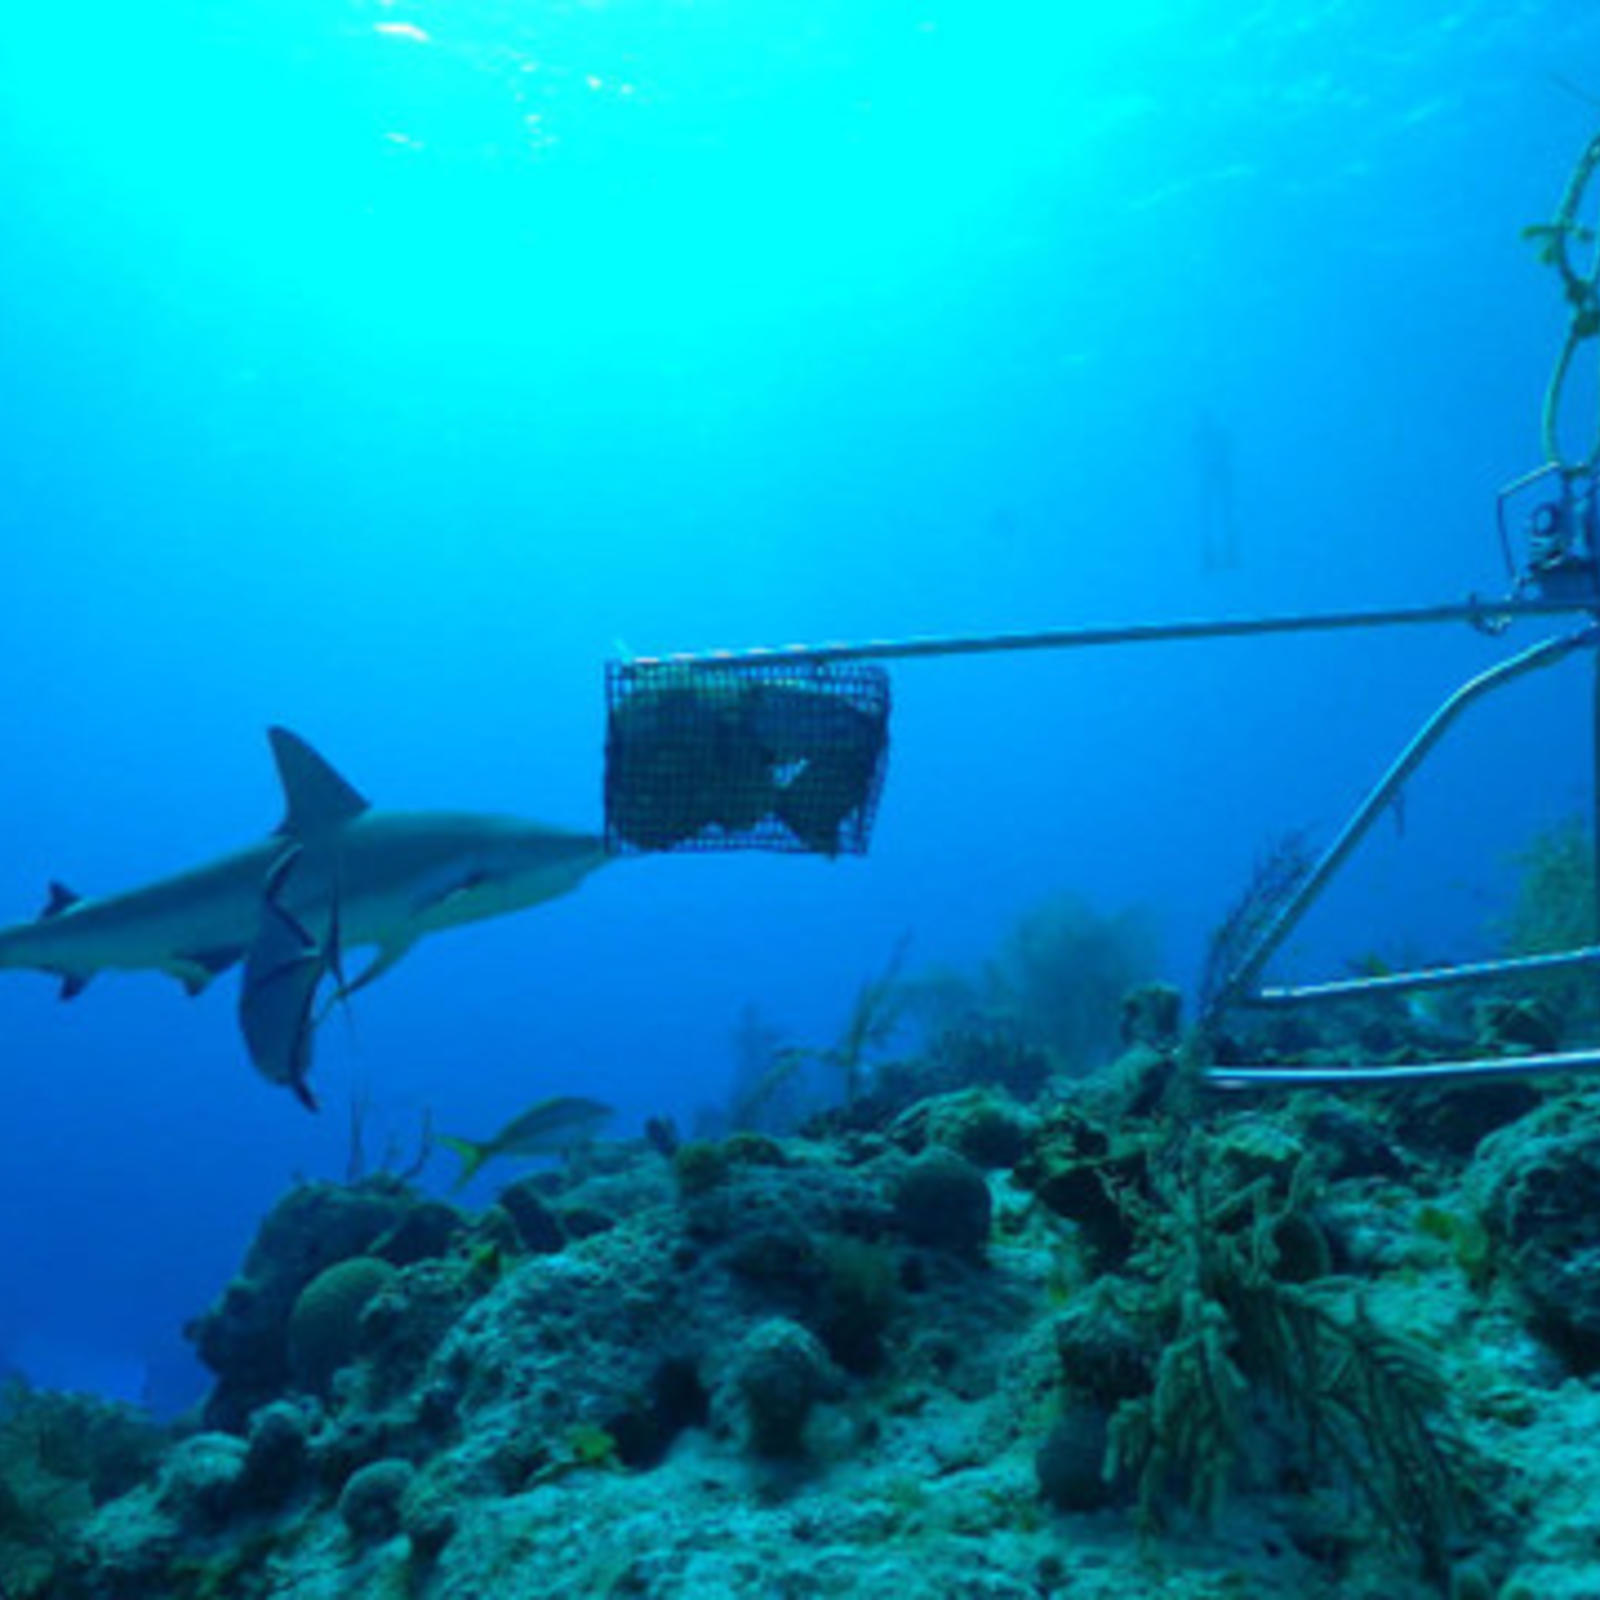 How countries are using innovative technology to preserve ocean life